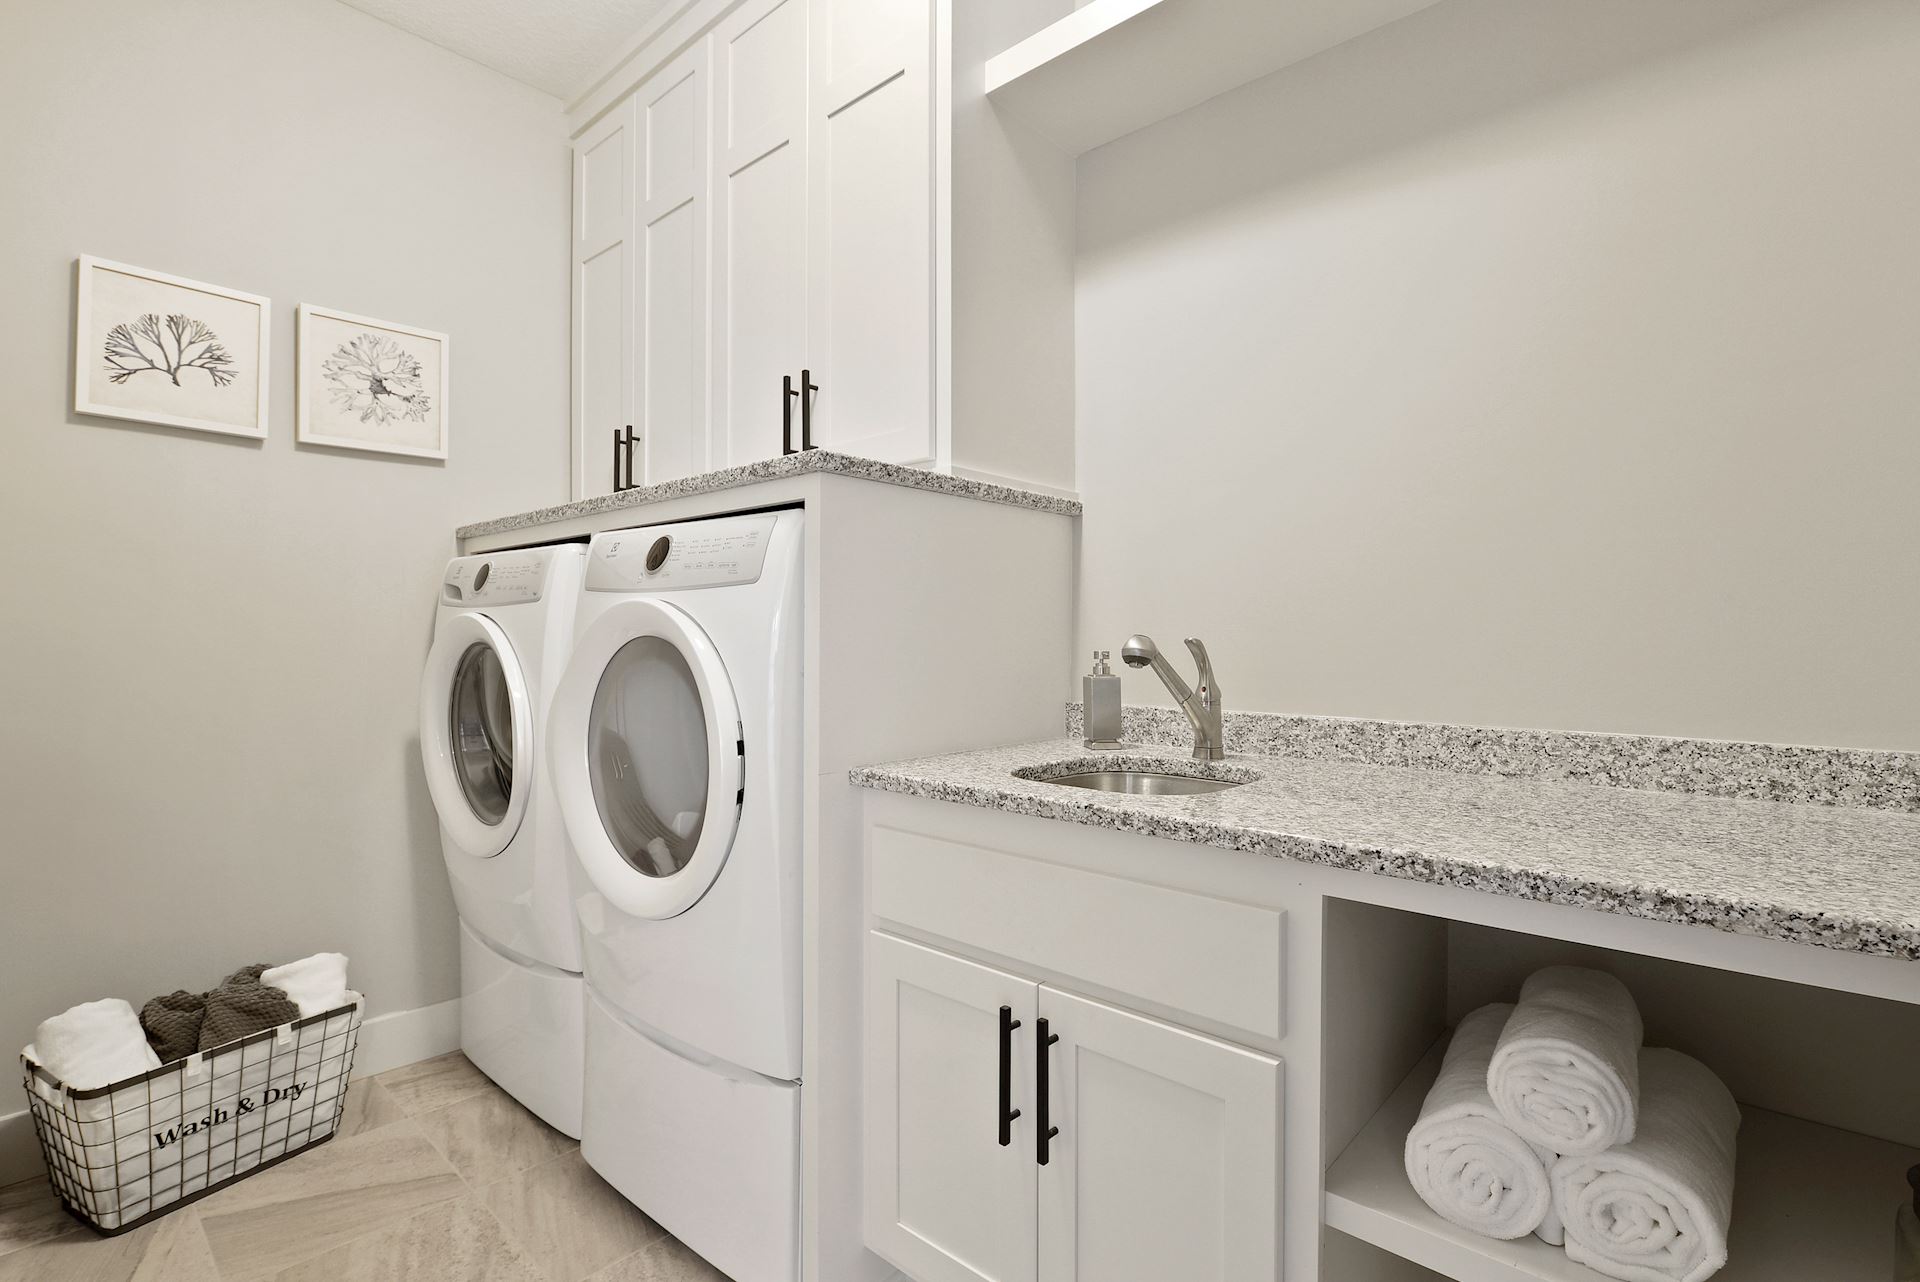 Laundry Room applicance on pedestals and granite counters